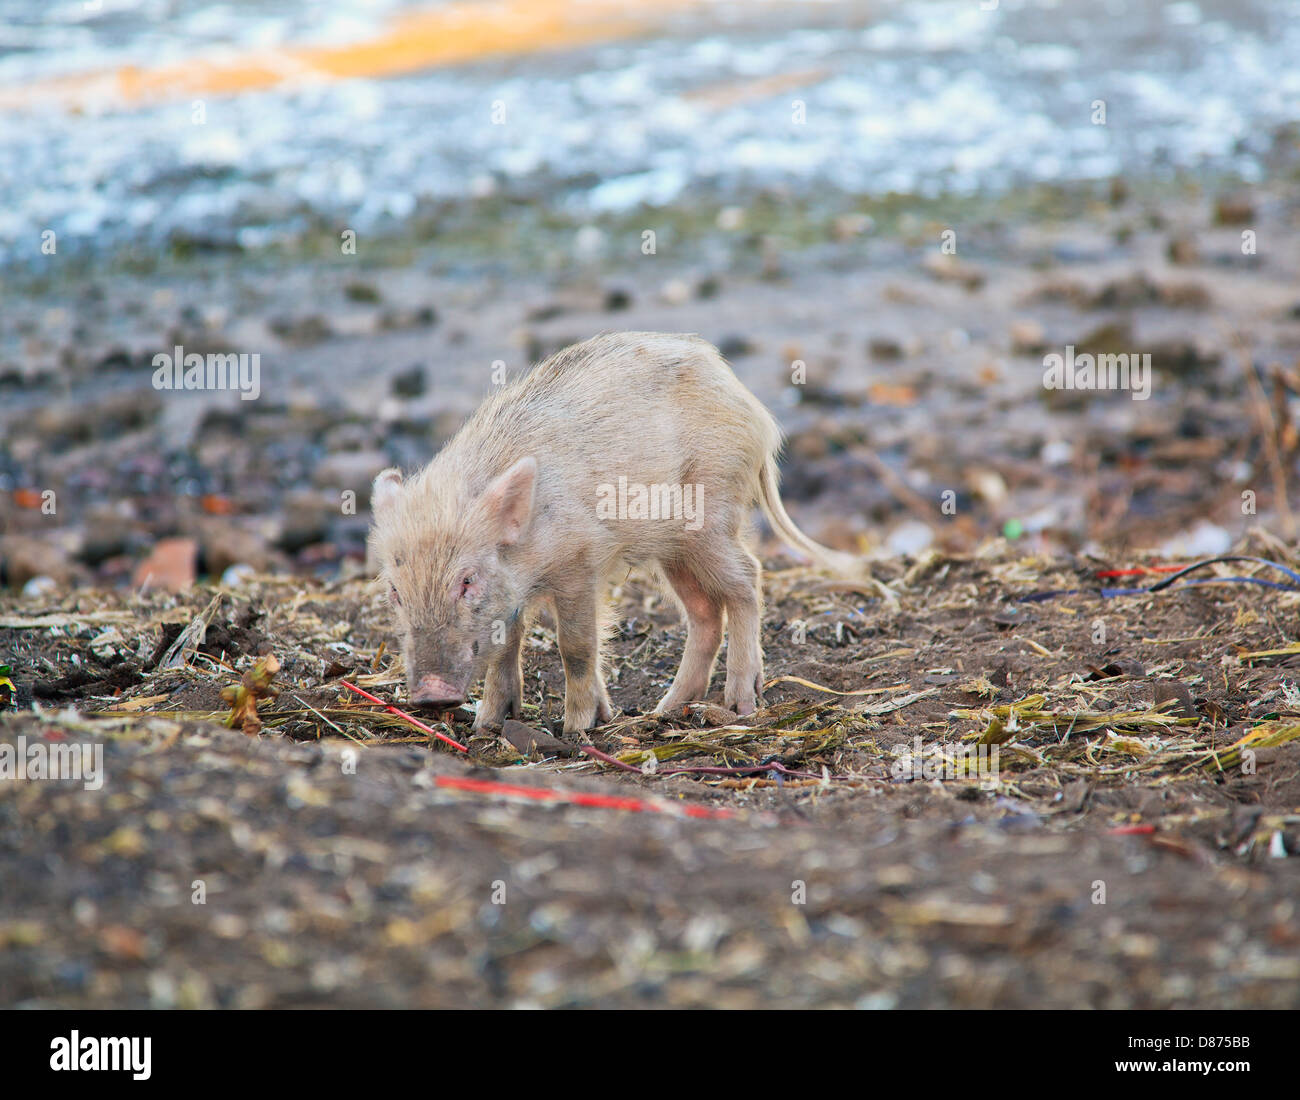 Square format color capture of a baby boar scavenging for food in the trash along the coastline at Okha, Gujarat, India Stock Photo